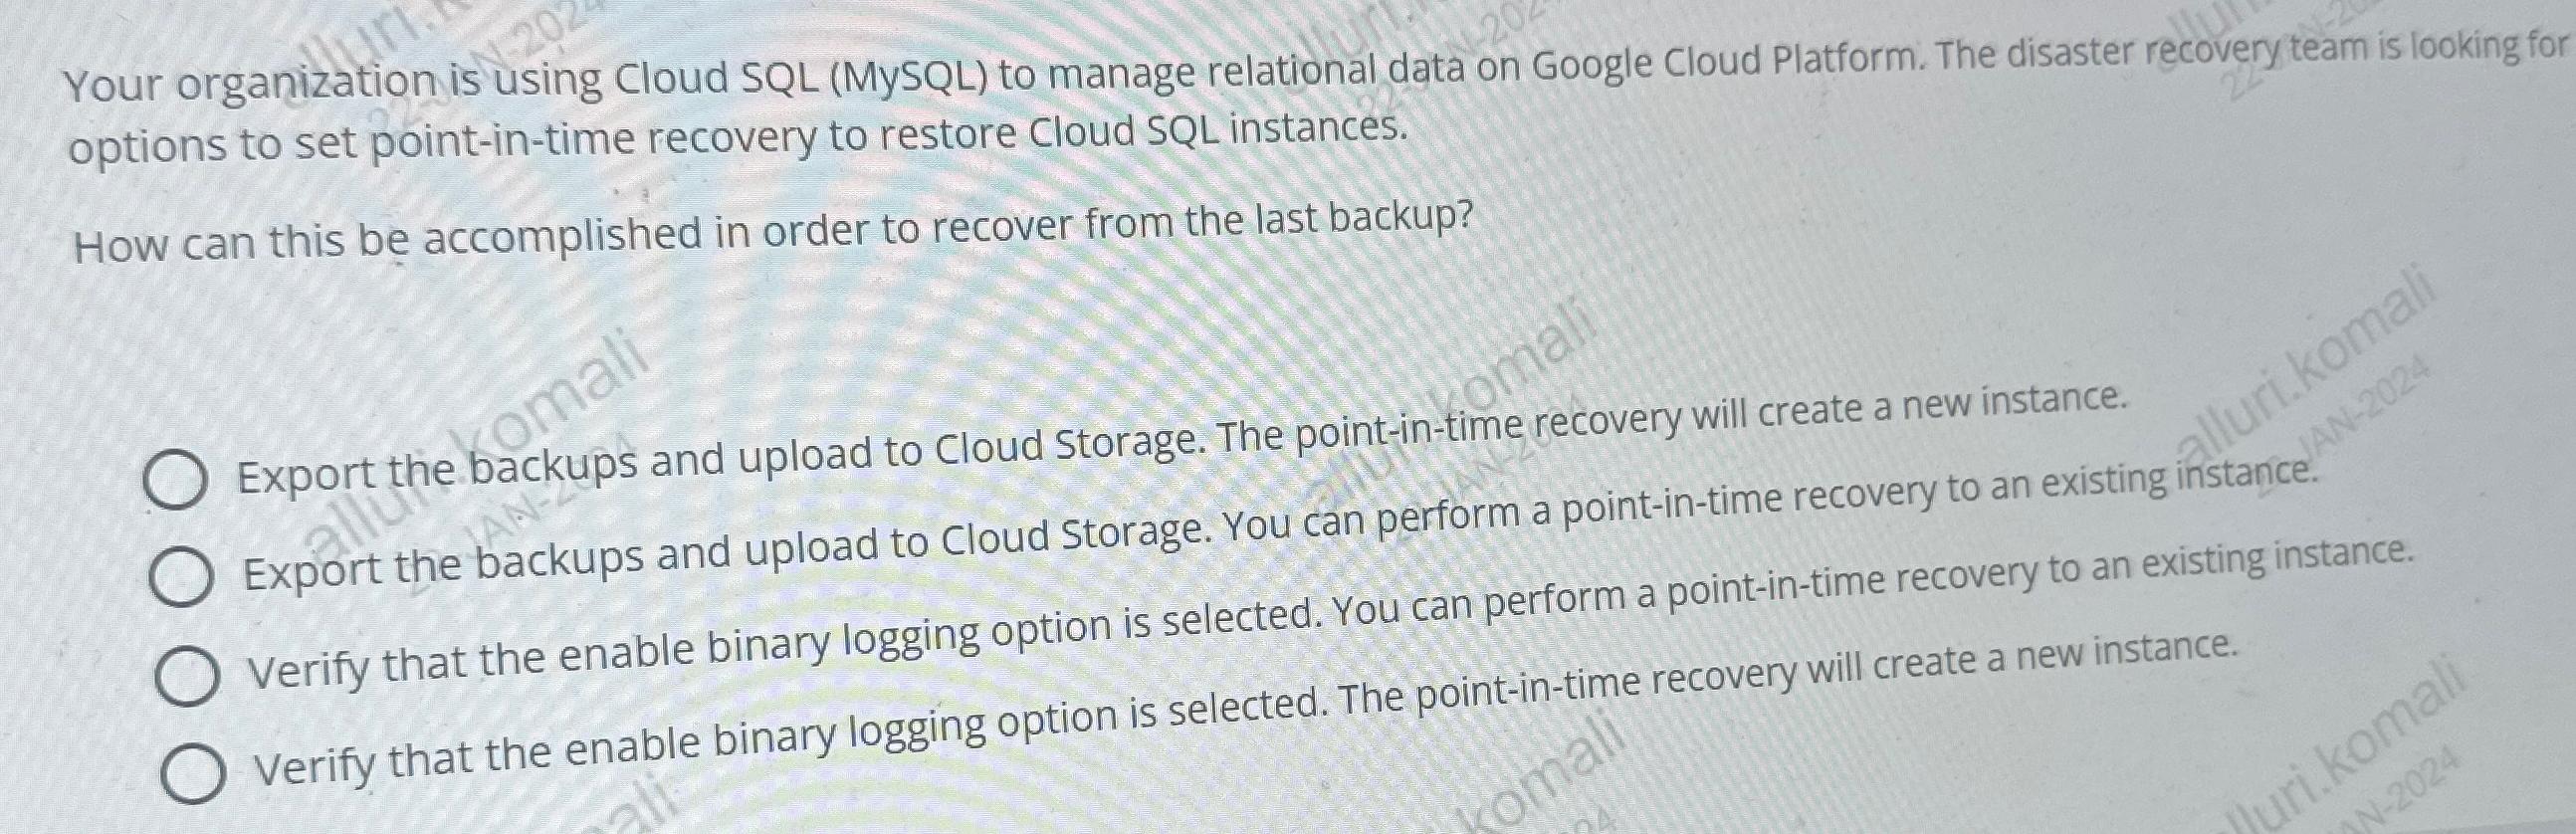 Your organization is using Cloud SQL (MySQL) to manage relational data on Google Cloud Platform. The disaster